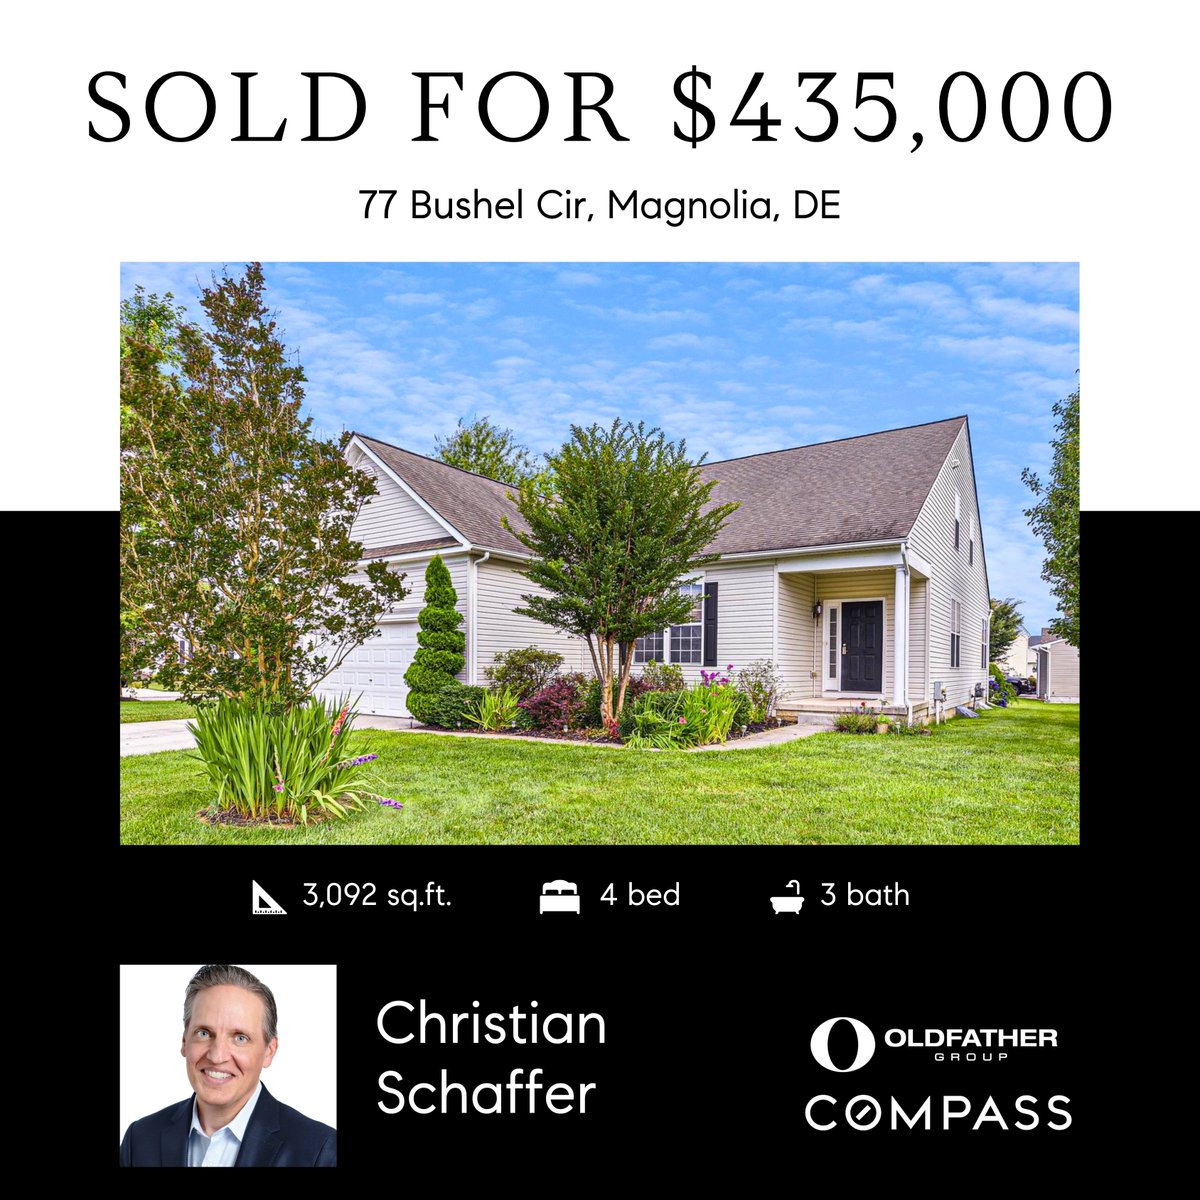 SOLD! Christian works magic again! 🪄
​
Ready to buy or sell your home? Contact Christian Schaffer today! 🔗 bit.ly/Christian-Scha…
​
#realtorlife #homesold #dreamhome #realestate #justsold #delaware #maryland #oldfather #compass